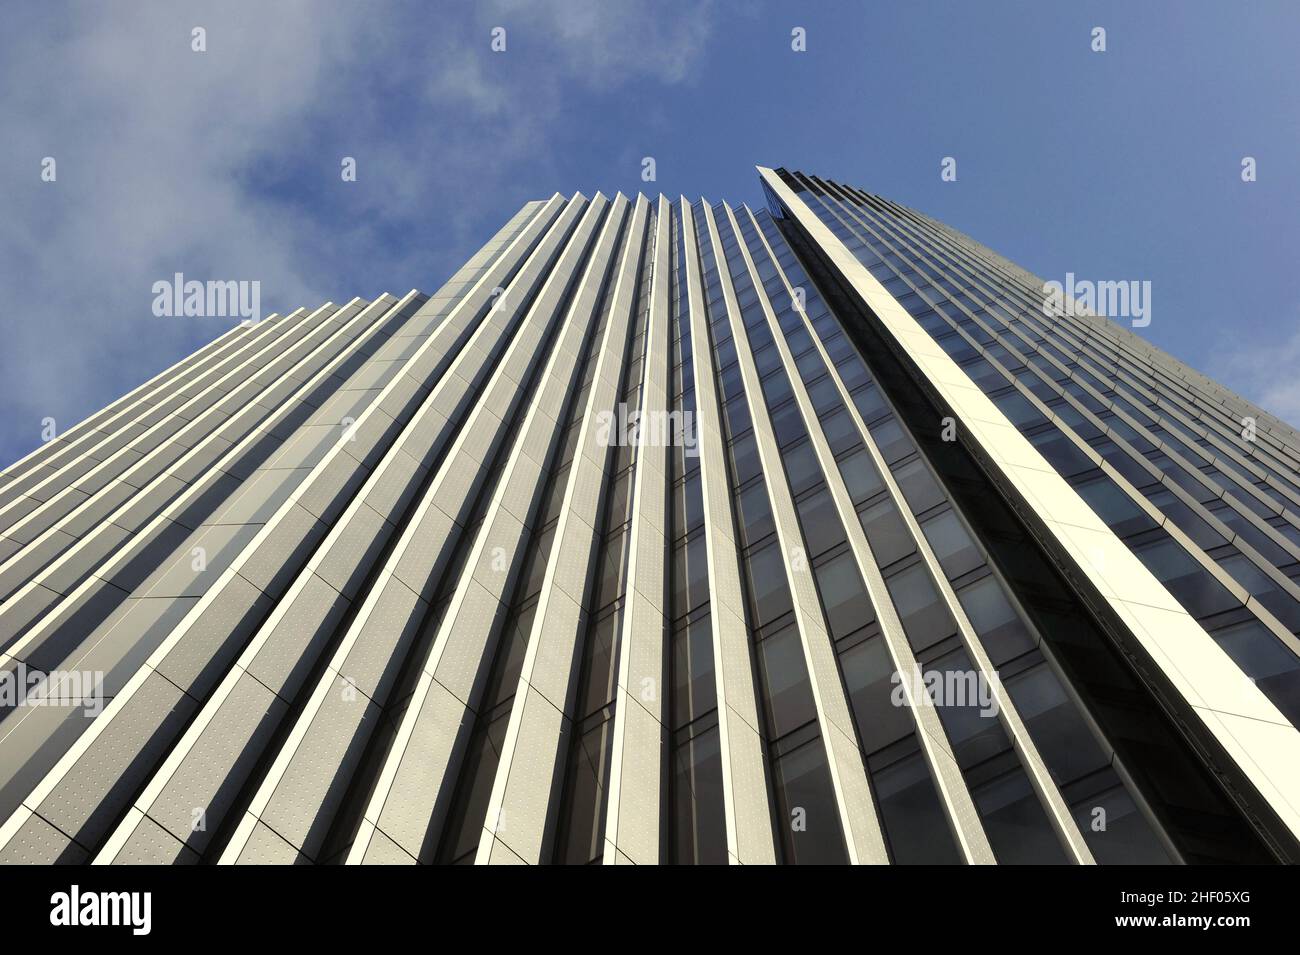 Willis Building - modern office development low angle view, located in City of London UK. Stock Photo